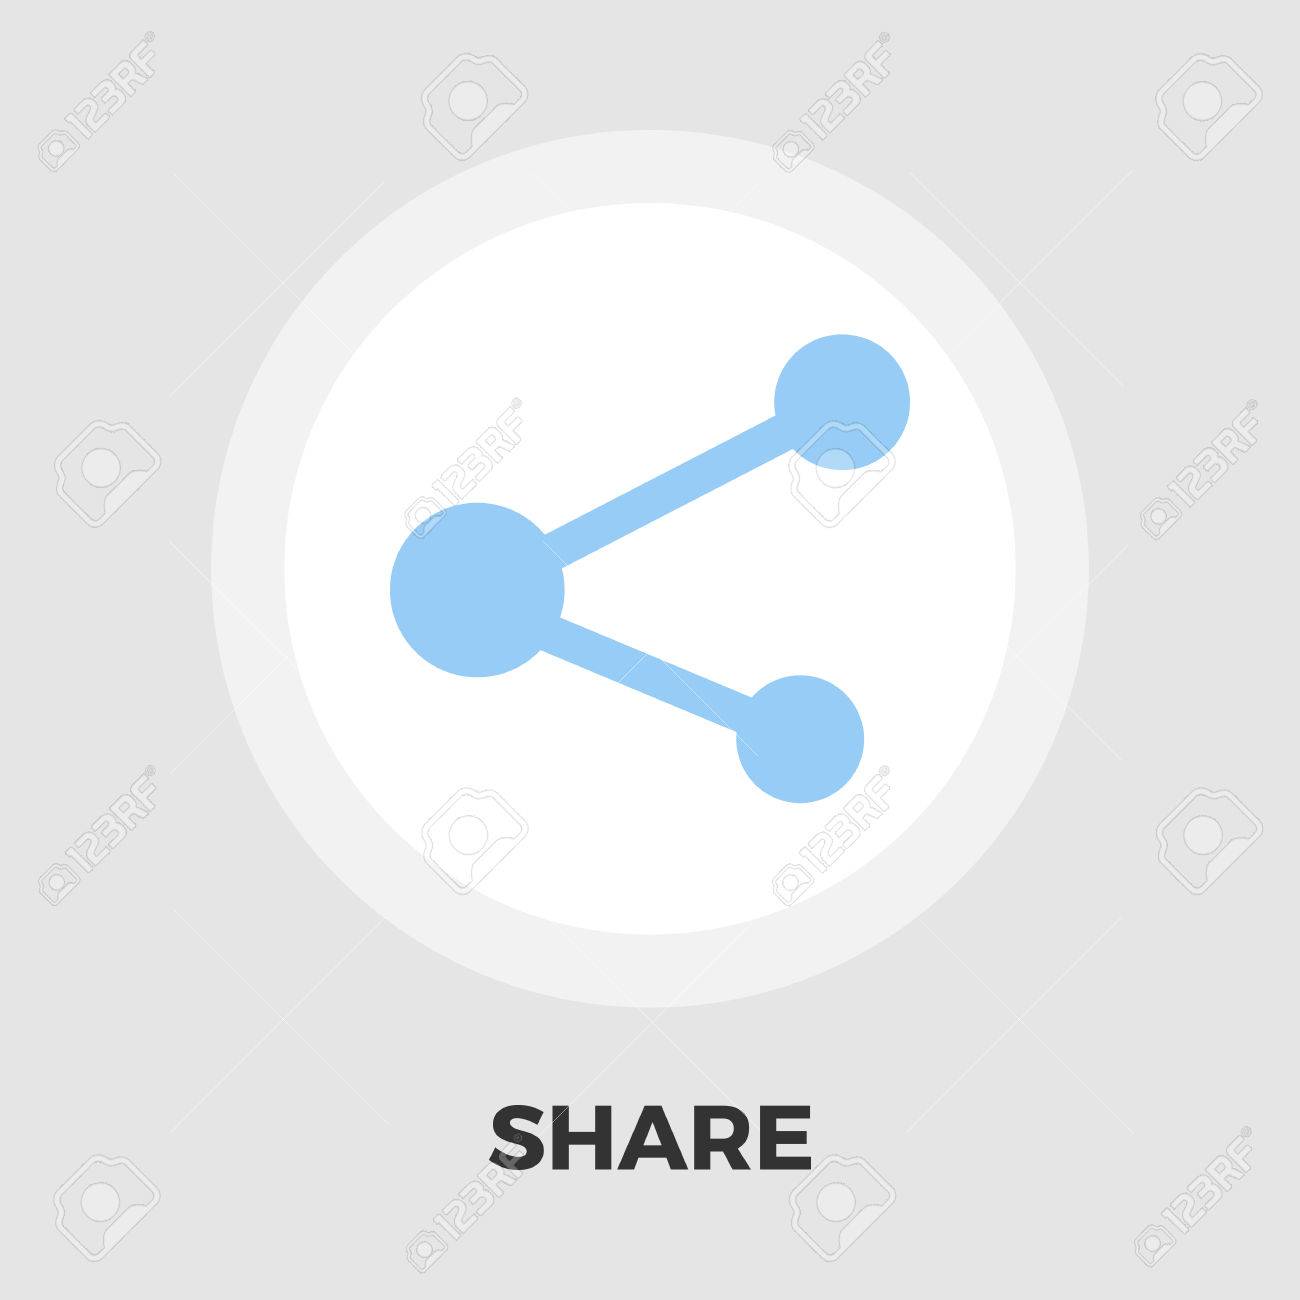 Share icon Flat design style Royalty Free Vector Image